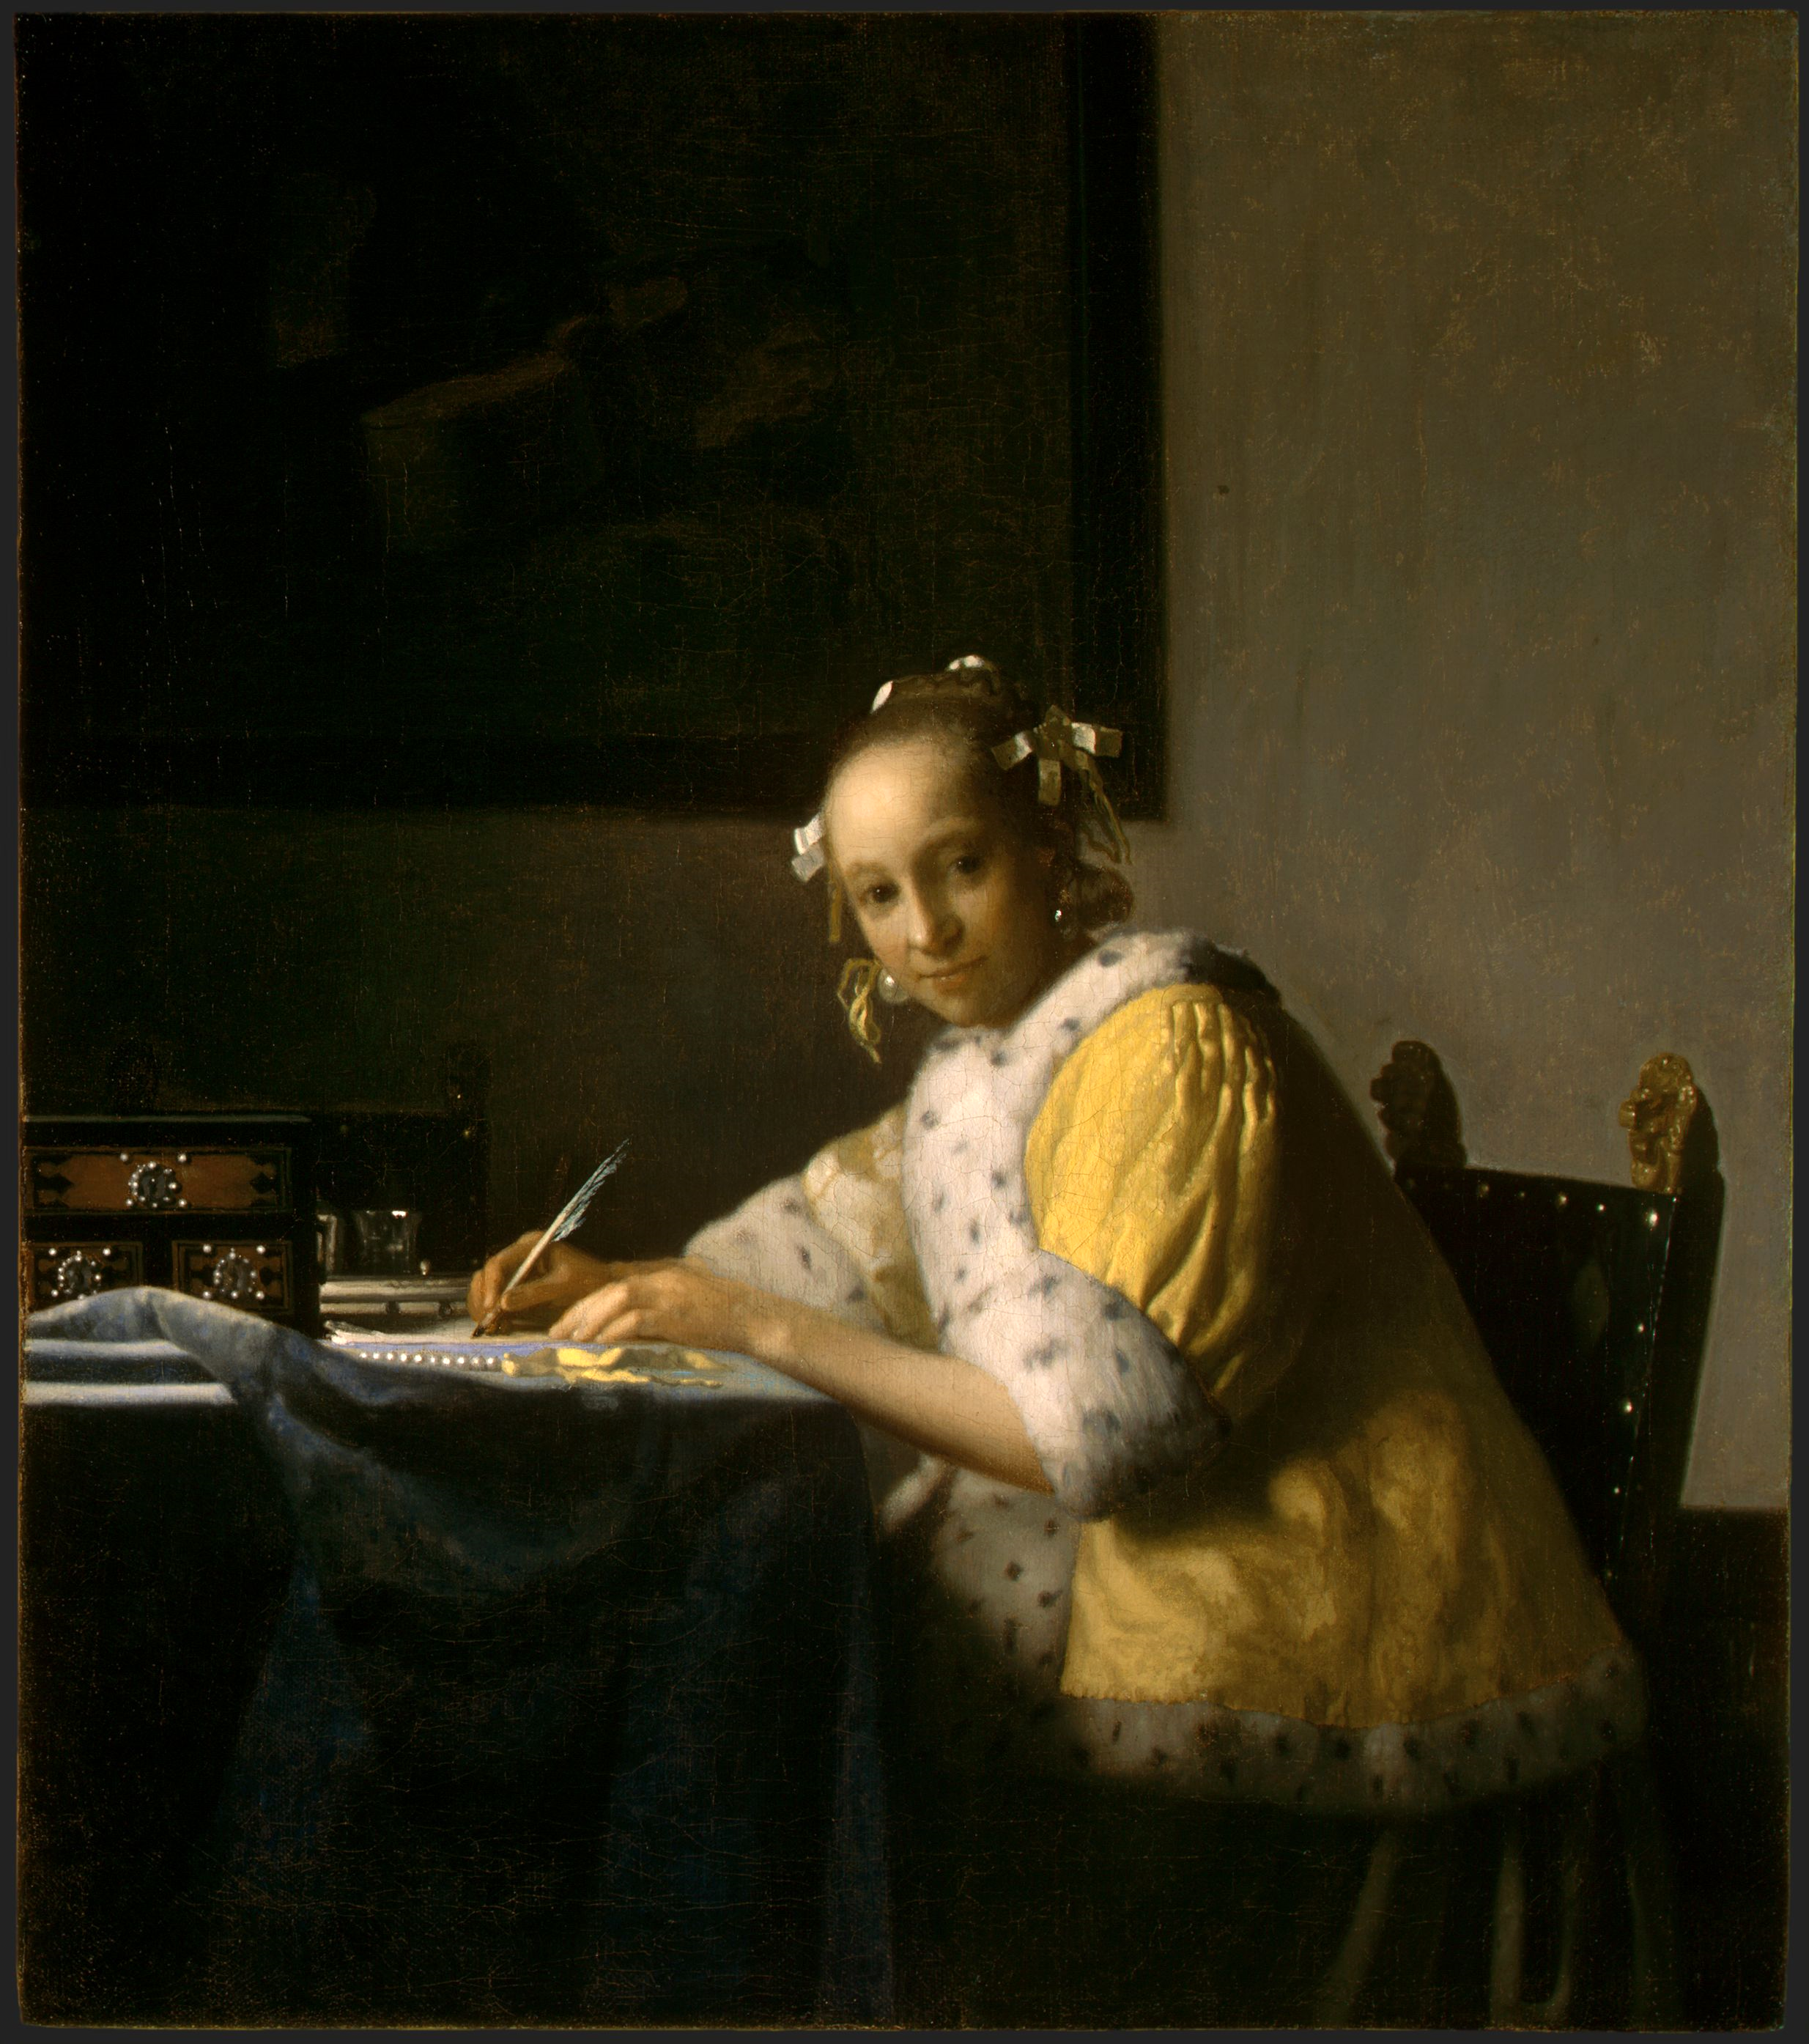 A Lady Writing a Letter by Johannes Vermeer - c. 1665 - 45 × 39.9 cm National Gallery of Art